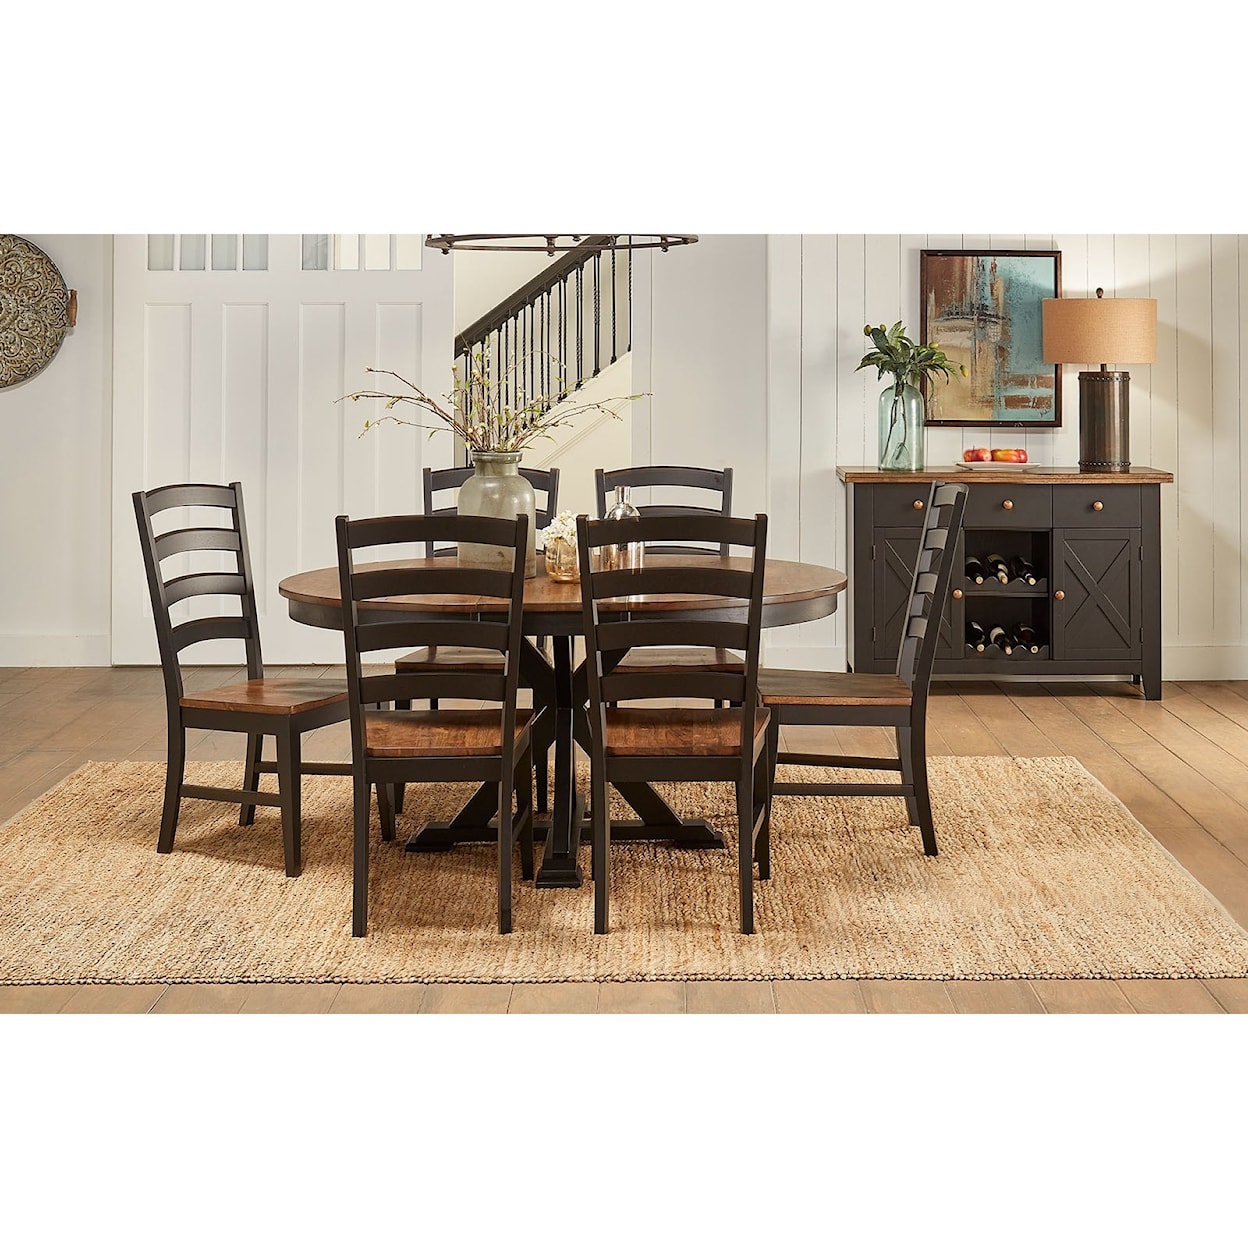 A-A Spencer Oval Dining Table